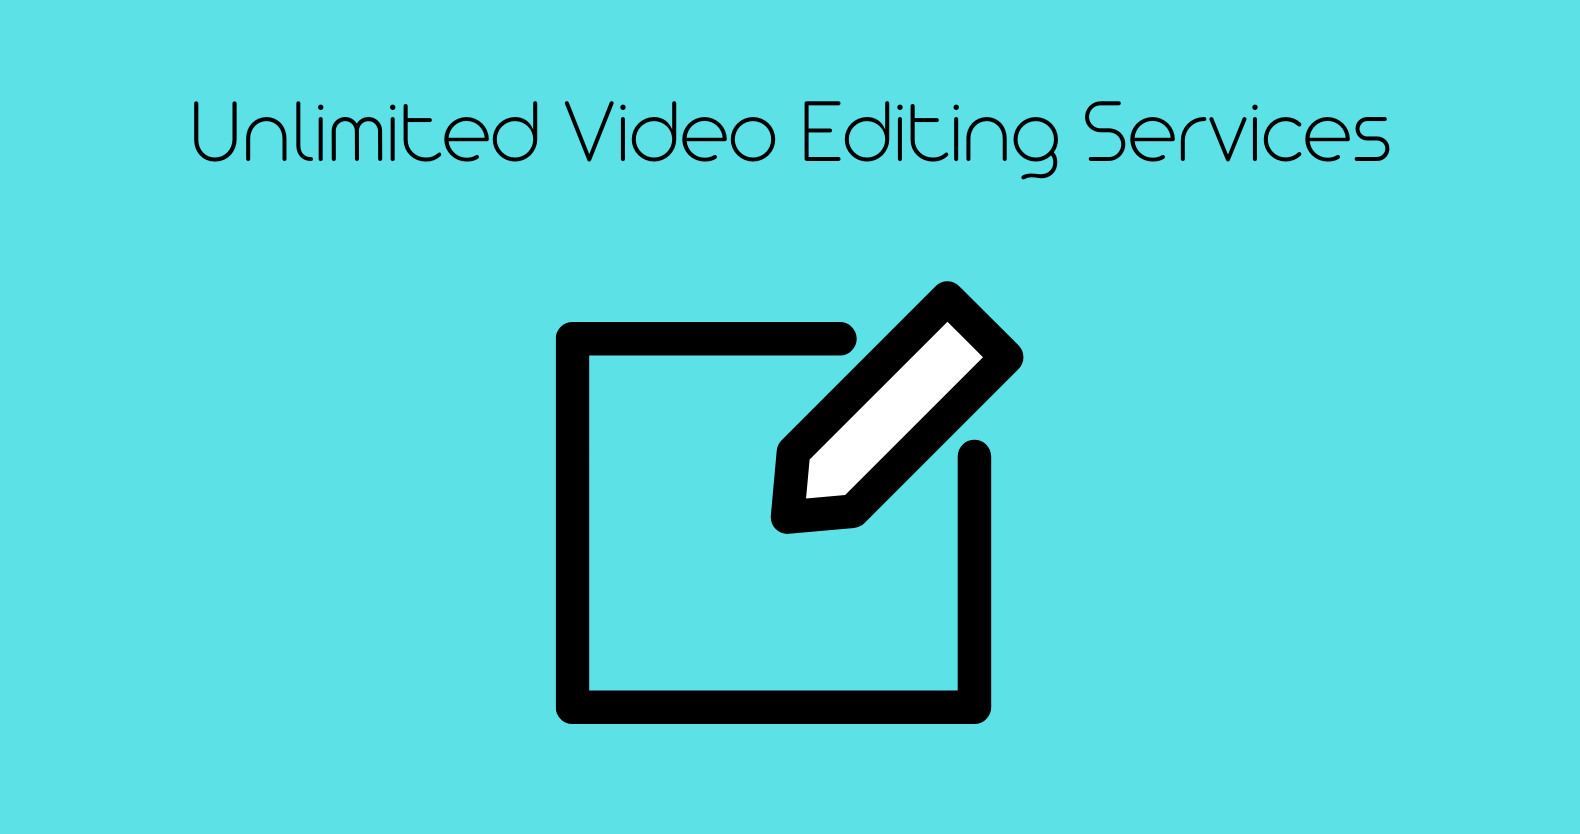 Unlimited Video Editing Services